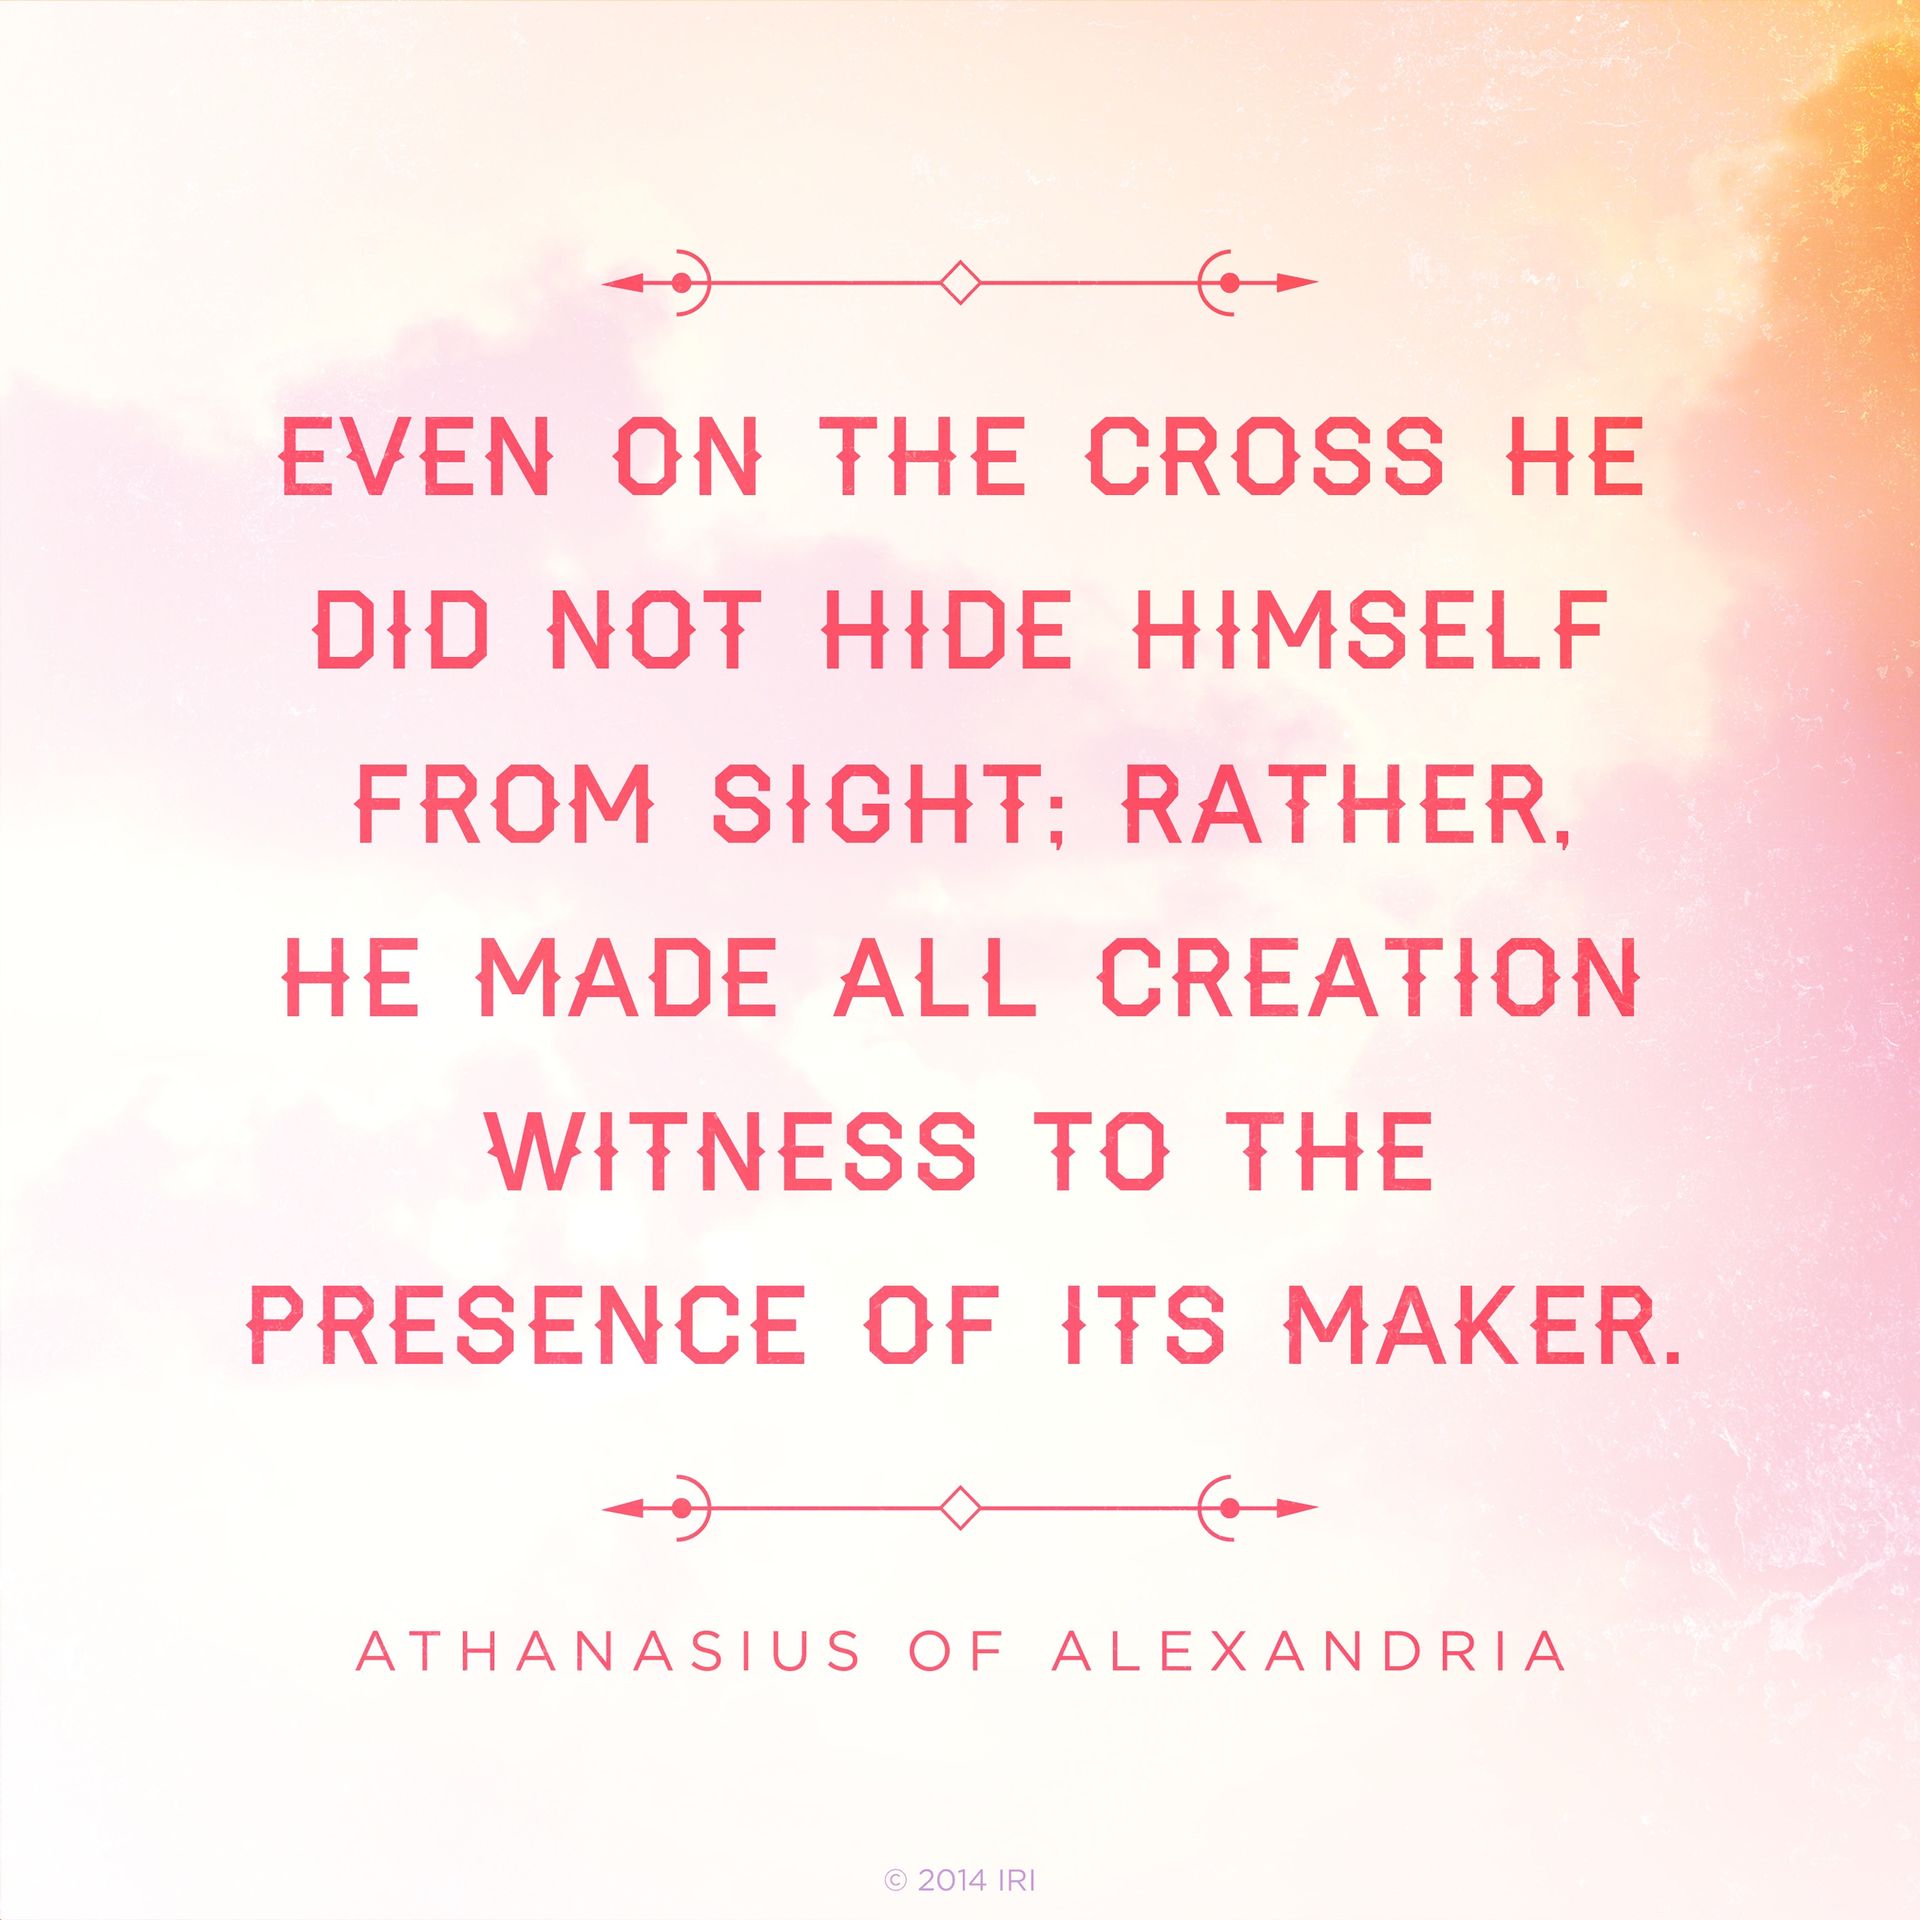 “Even on the cross He did not hide Himself from sight: rather, He made all creation witness to the presence of its Maker.”—Athanasius of Alexandria, “On the Incarnation”